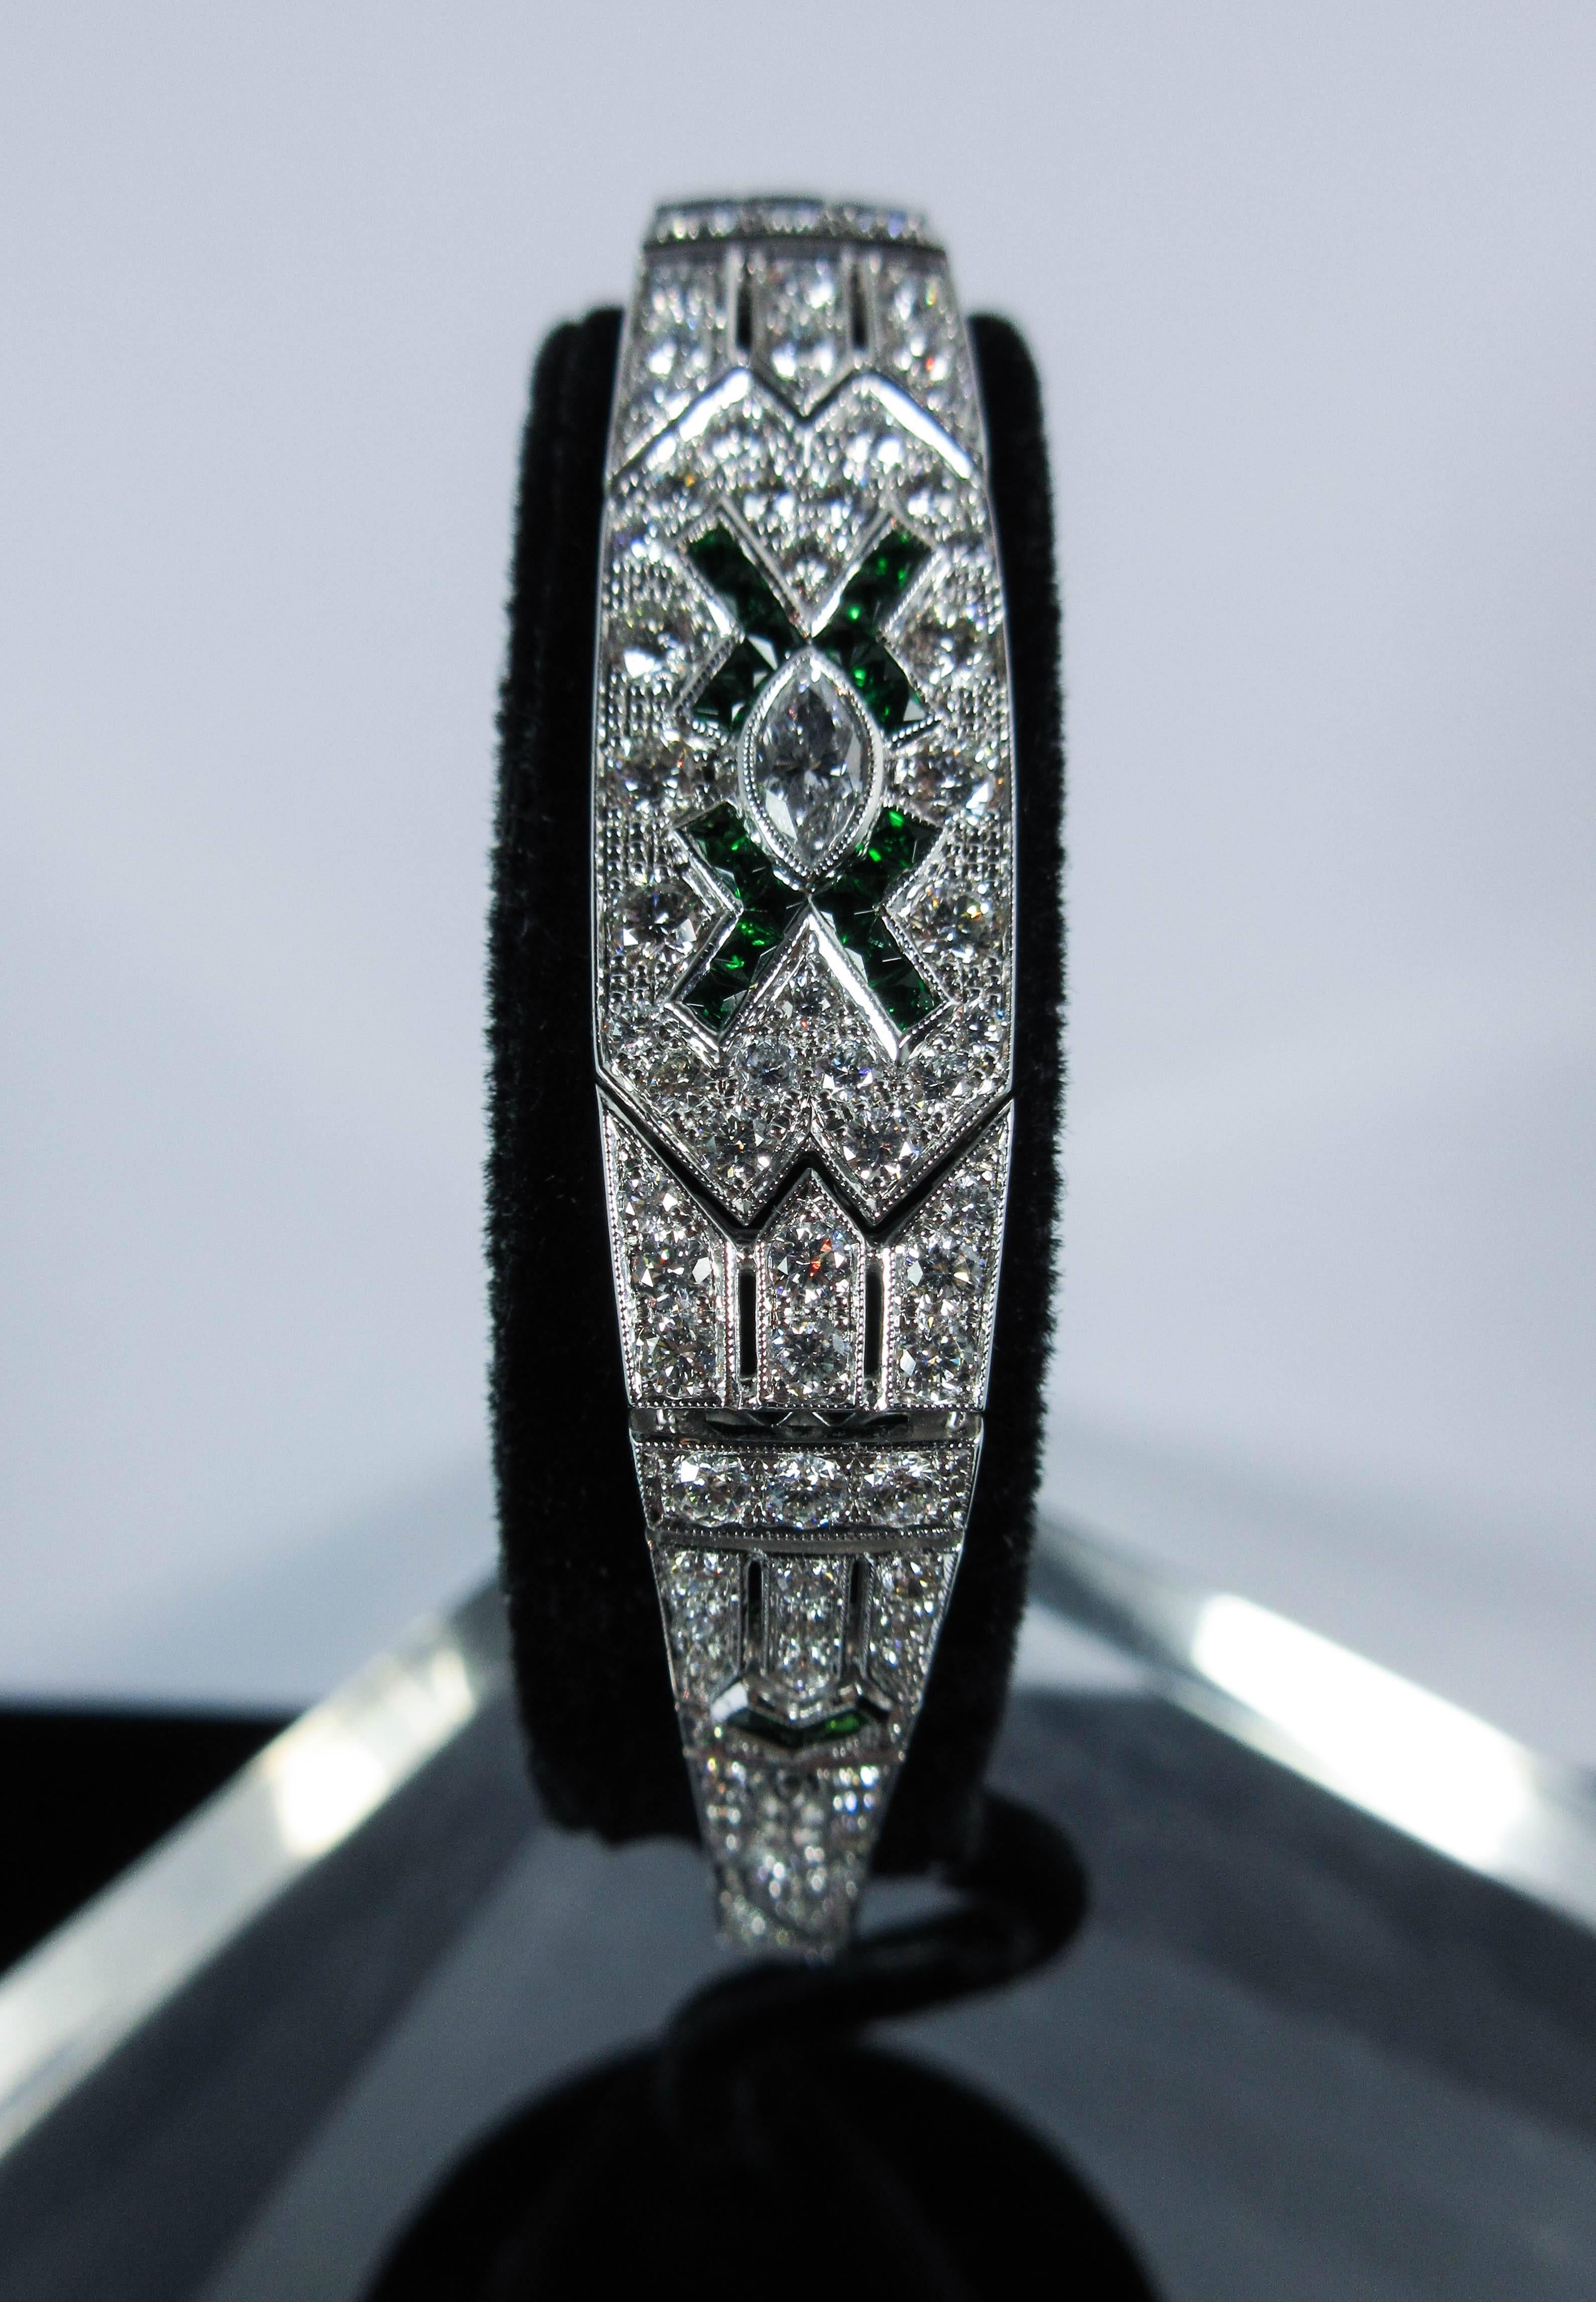 Tsavorite Garnet and 4.55 Carat White Diamond White Gold Bracelet.
This Deco style bracelet is composed of white diamonds and green Tsavorite Garnets. 

Please feel free to ask any questions you may have and it will be our pleasure to assist you